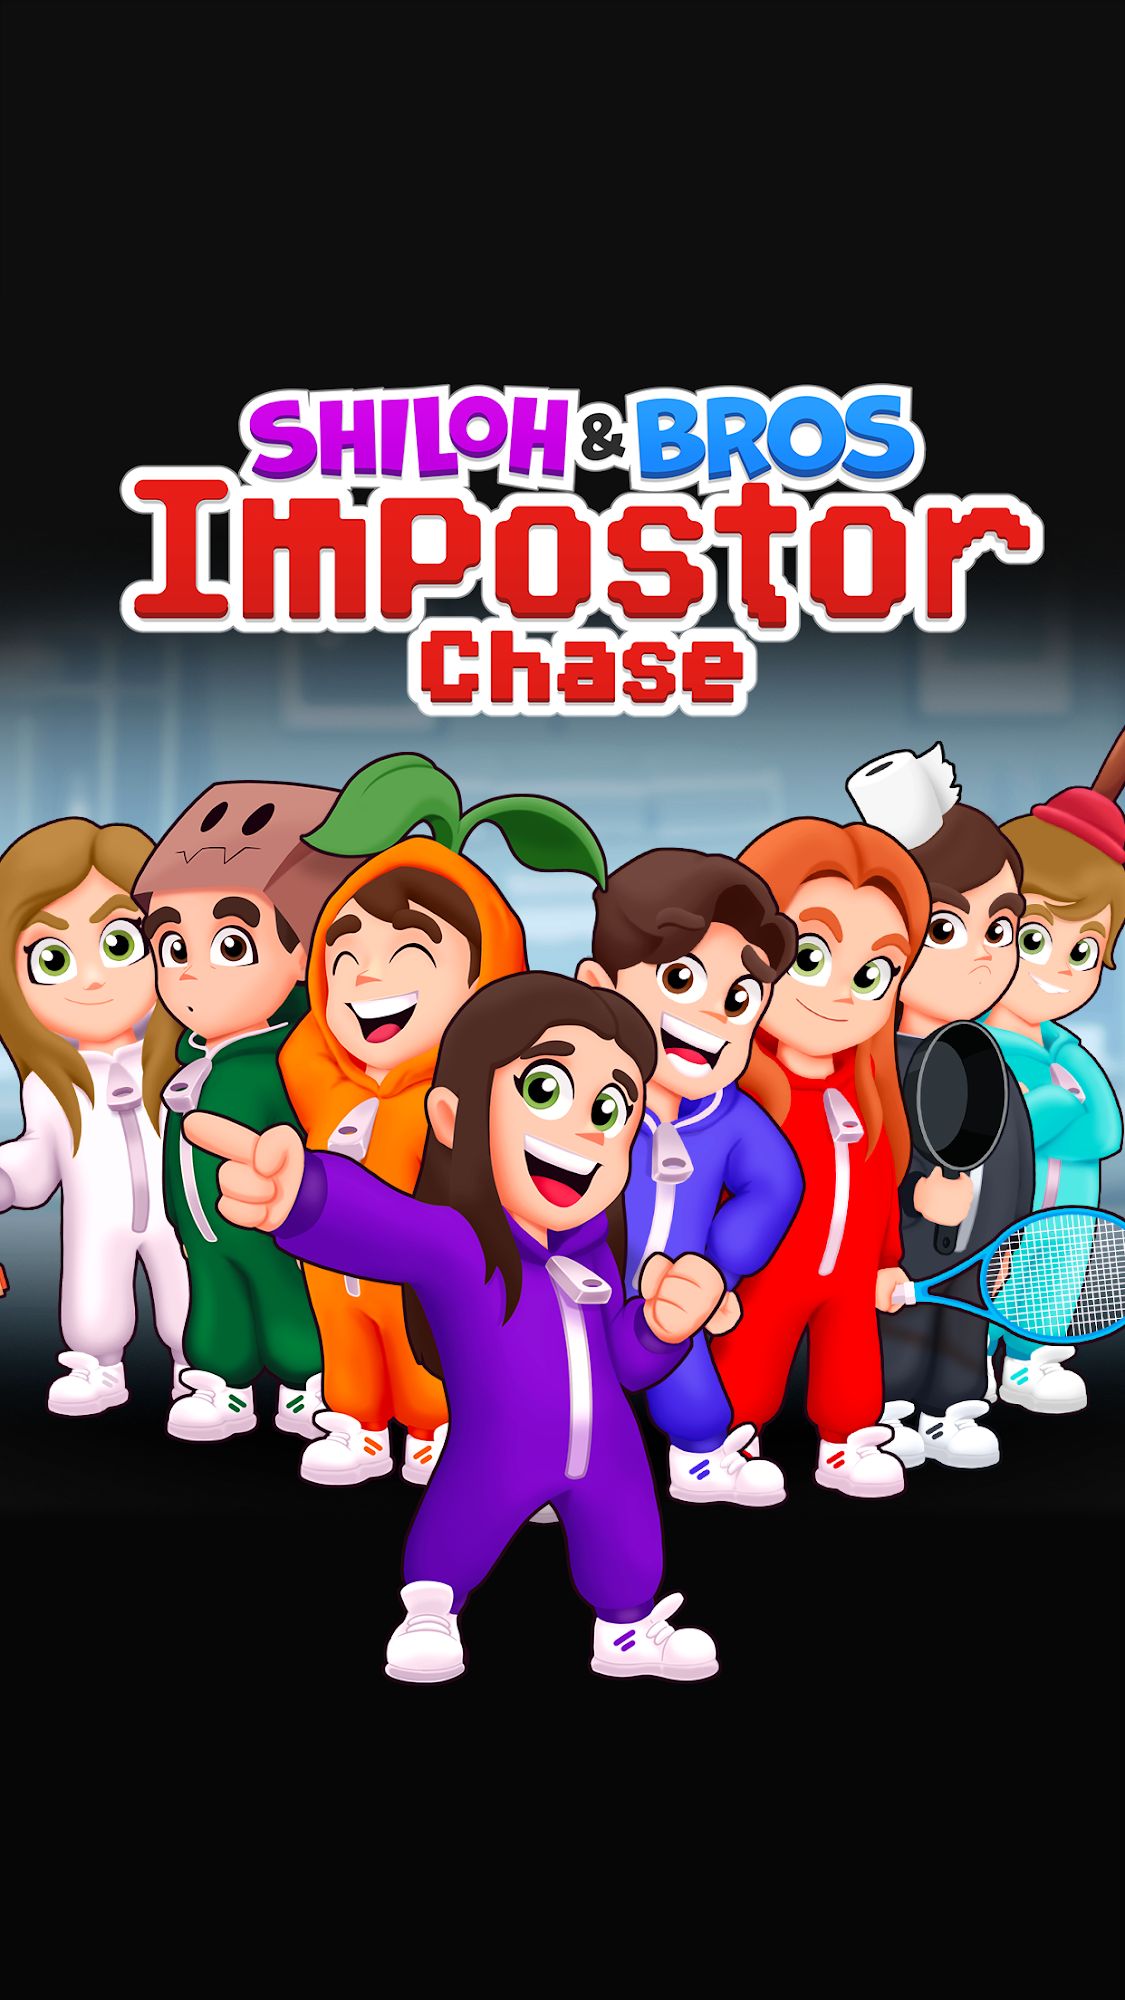 Download Shiloh & Bros Impostor Chase Android free game.